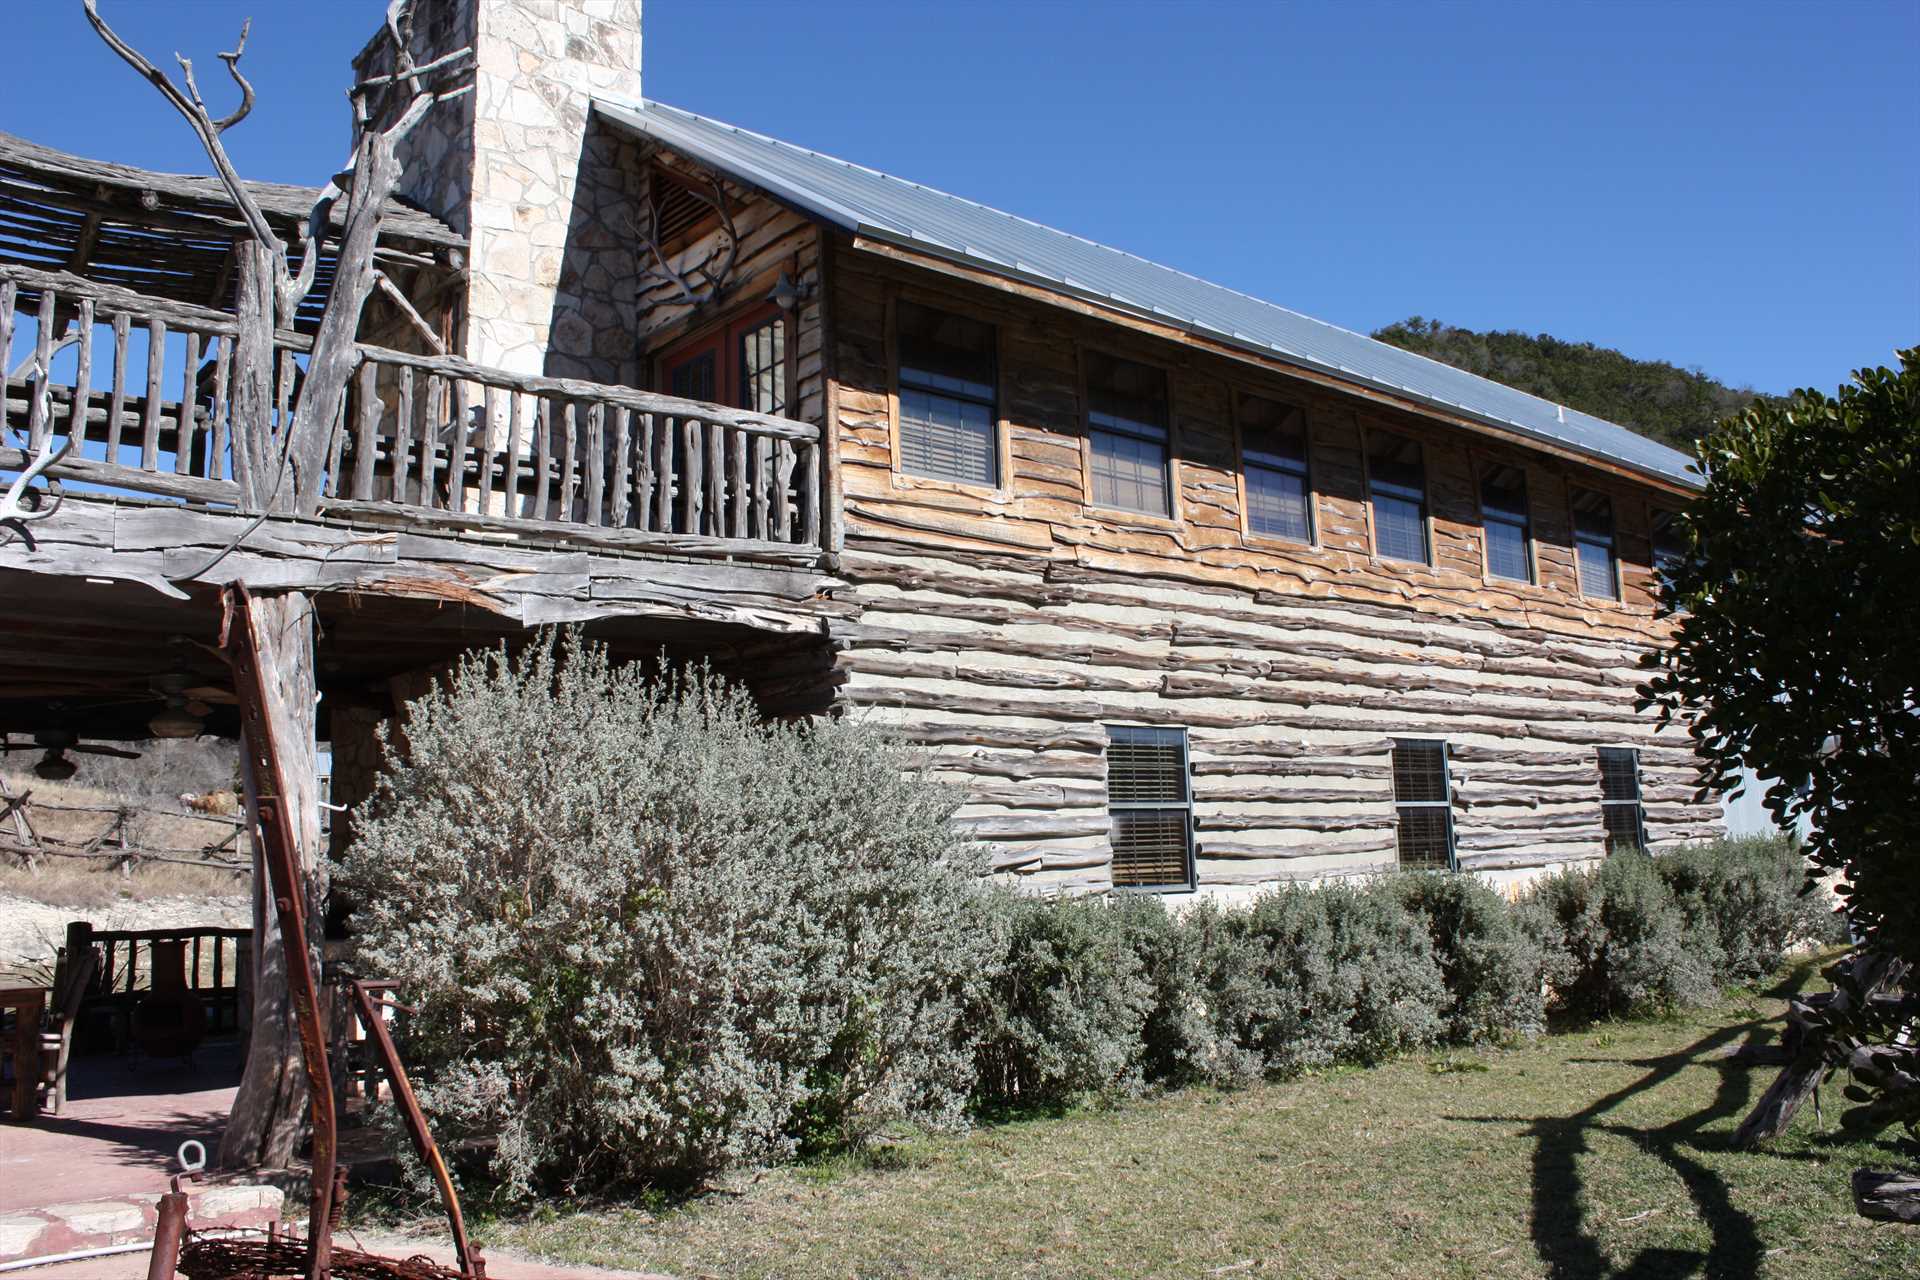                                                 Immaculate grounds and rustic western lodge atmosphere greet you to this wonderful Hill Country hideaway!